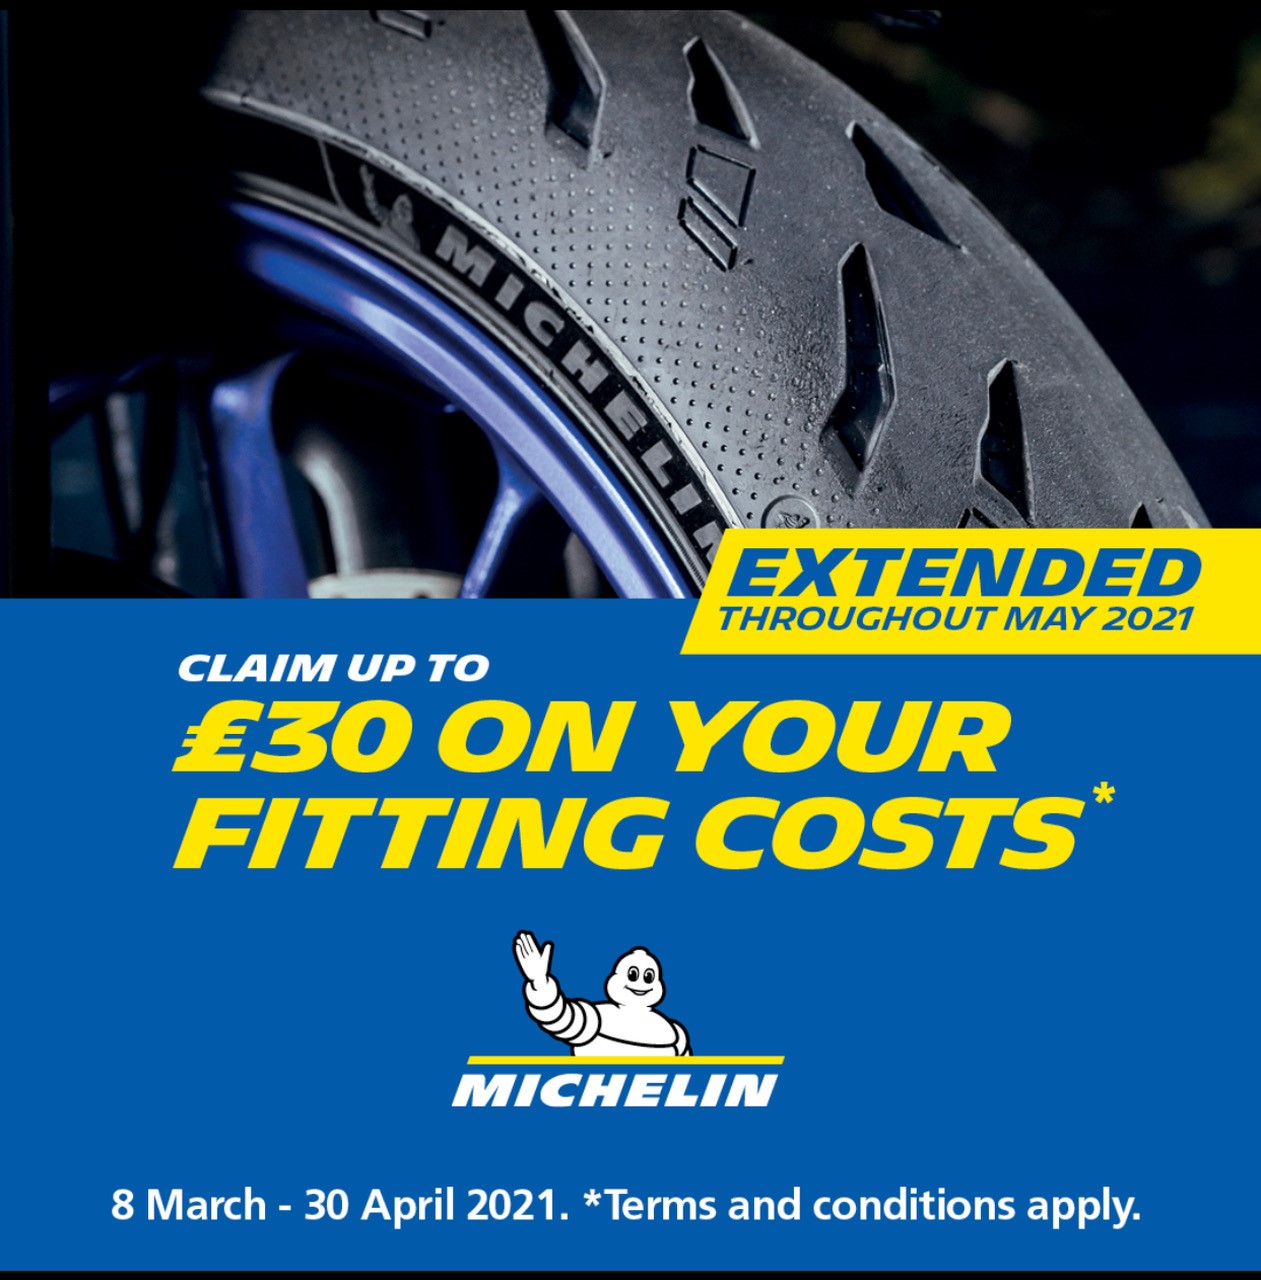 Save £30 with Michelin motorcycle tyres